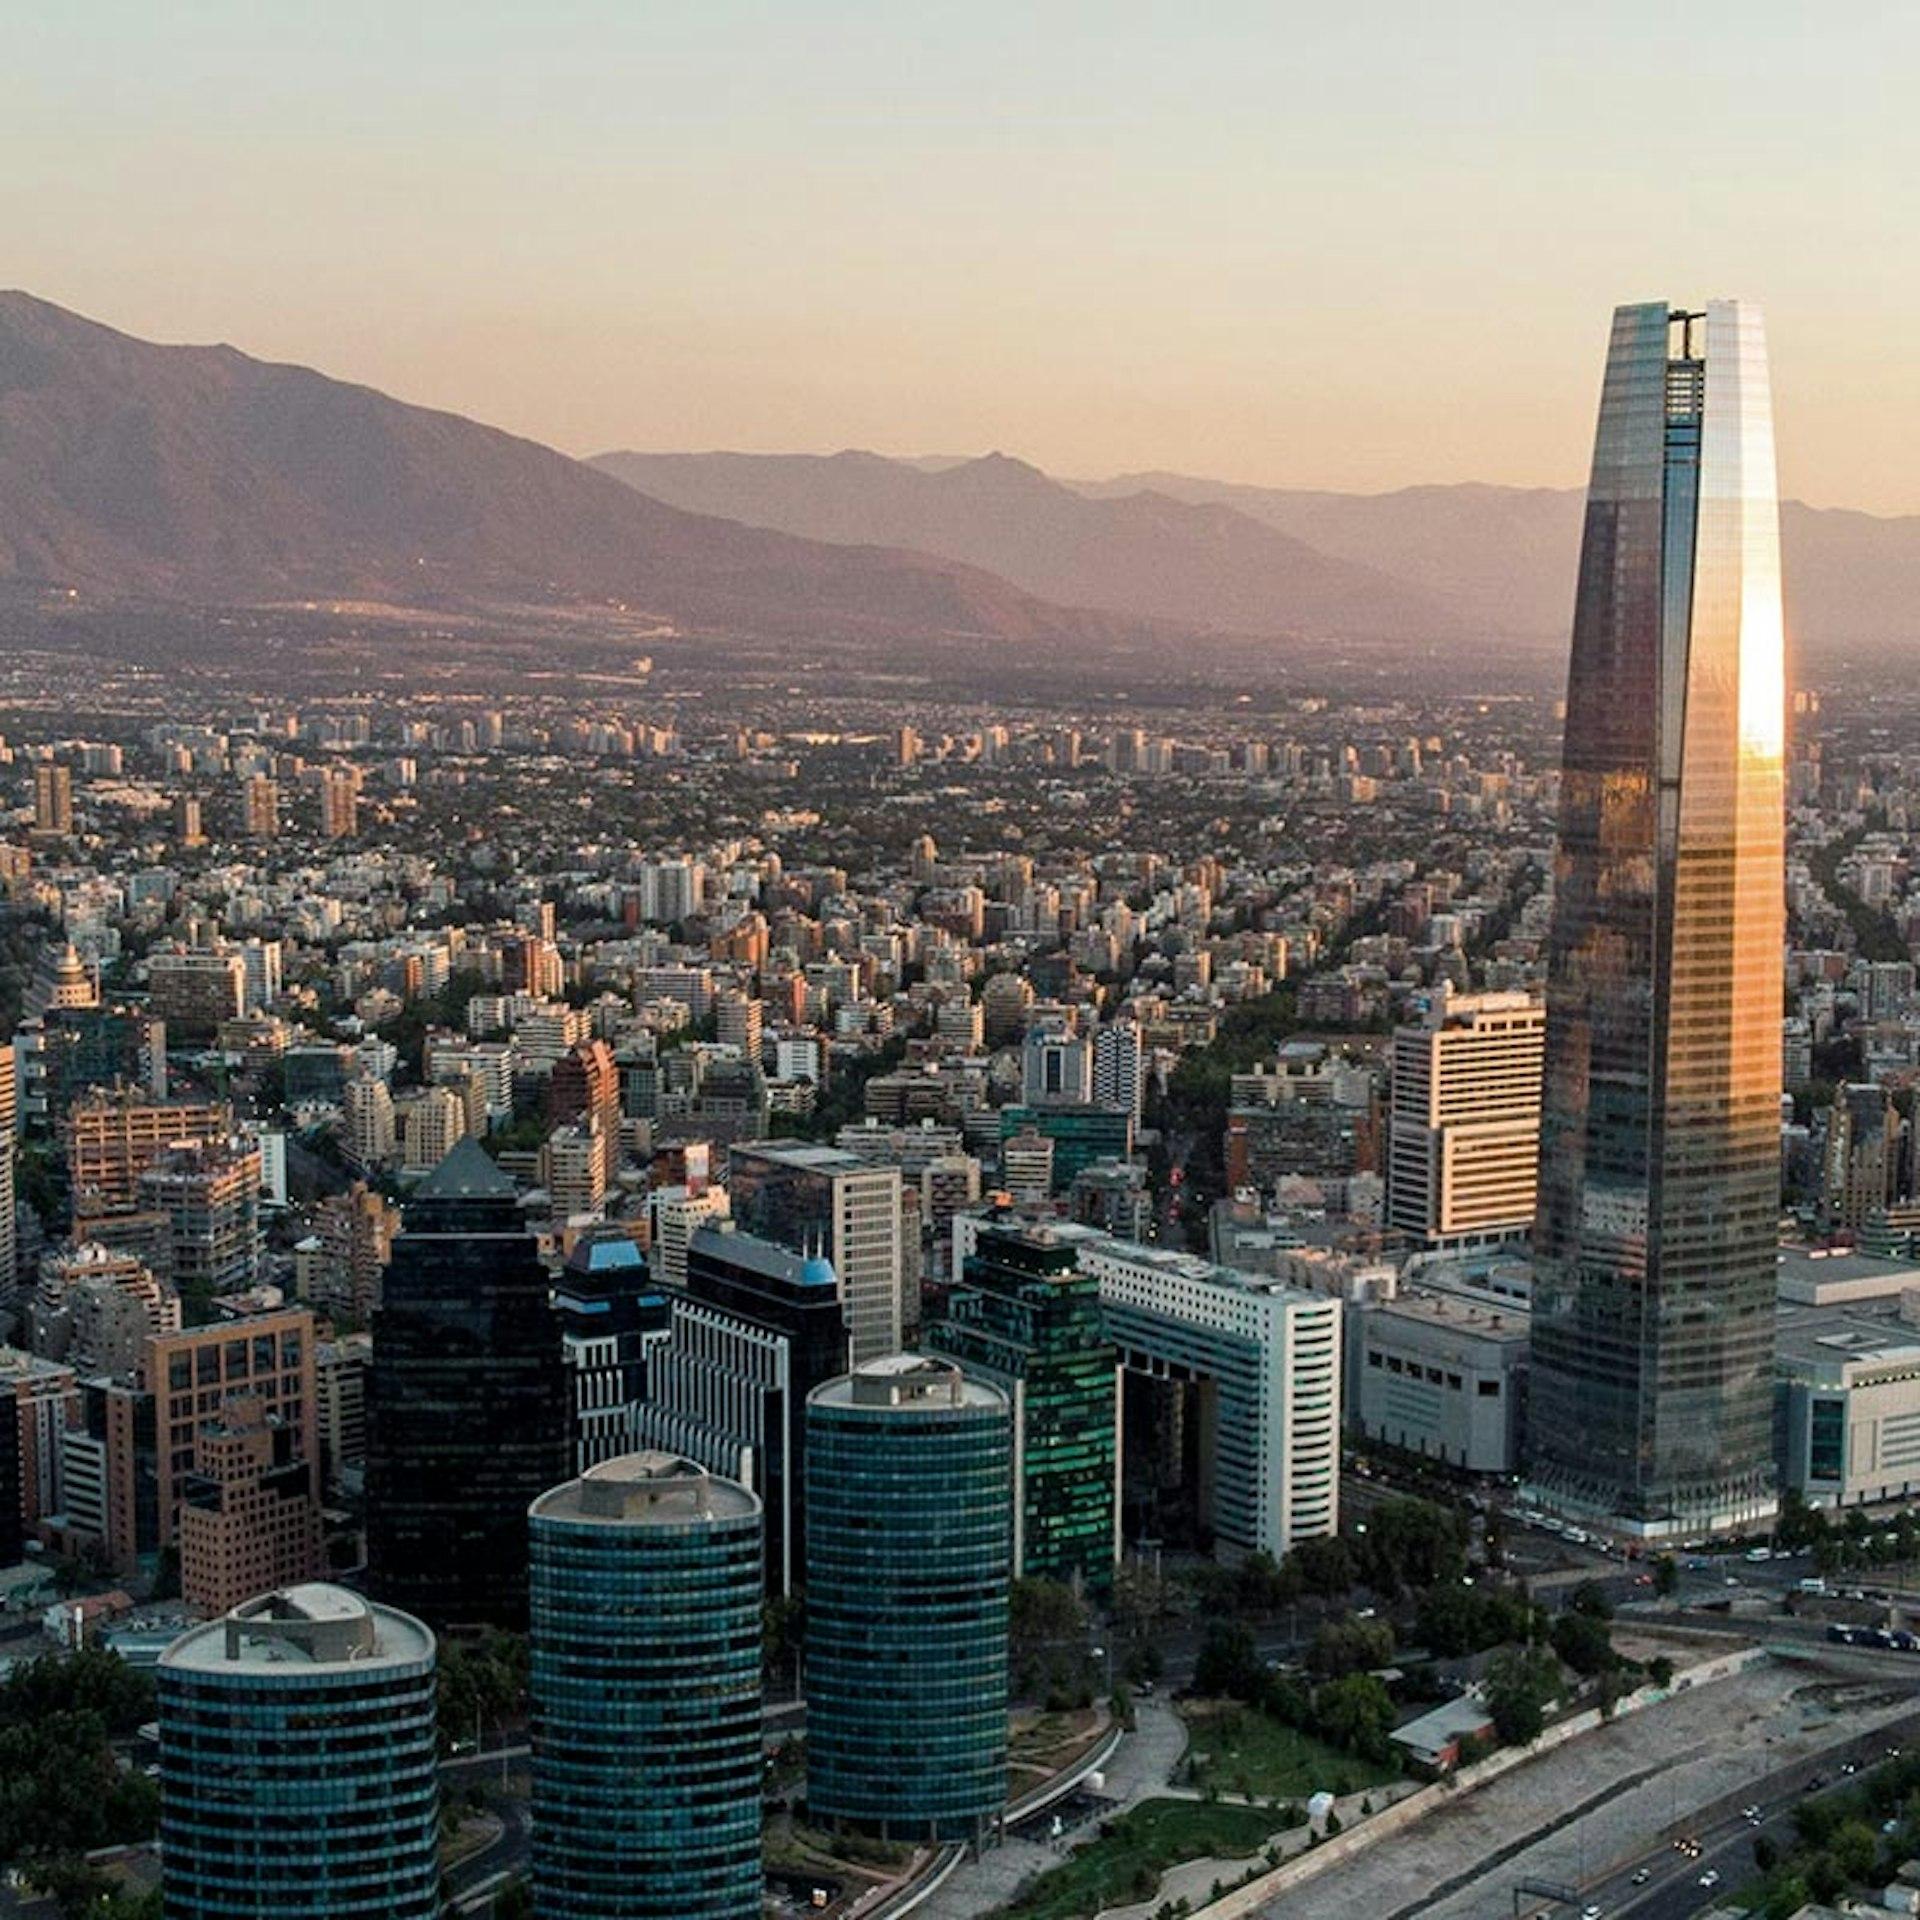 Get the latest news and updates on e-invoicing, e-ordering, e-archiving and indirect tax regulatory requirements for Chile.